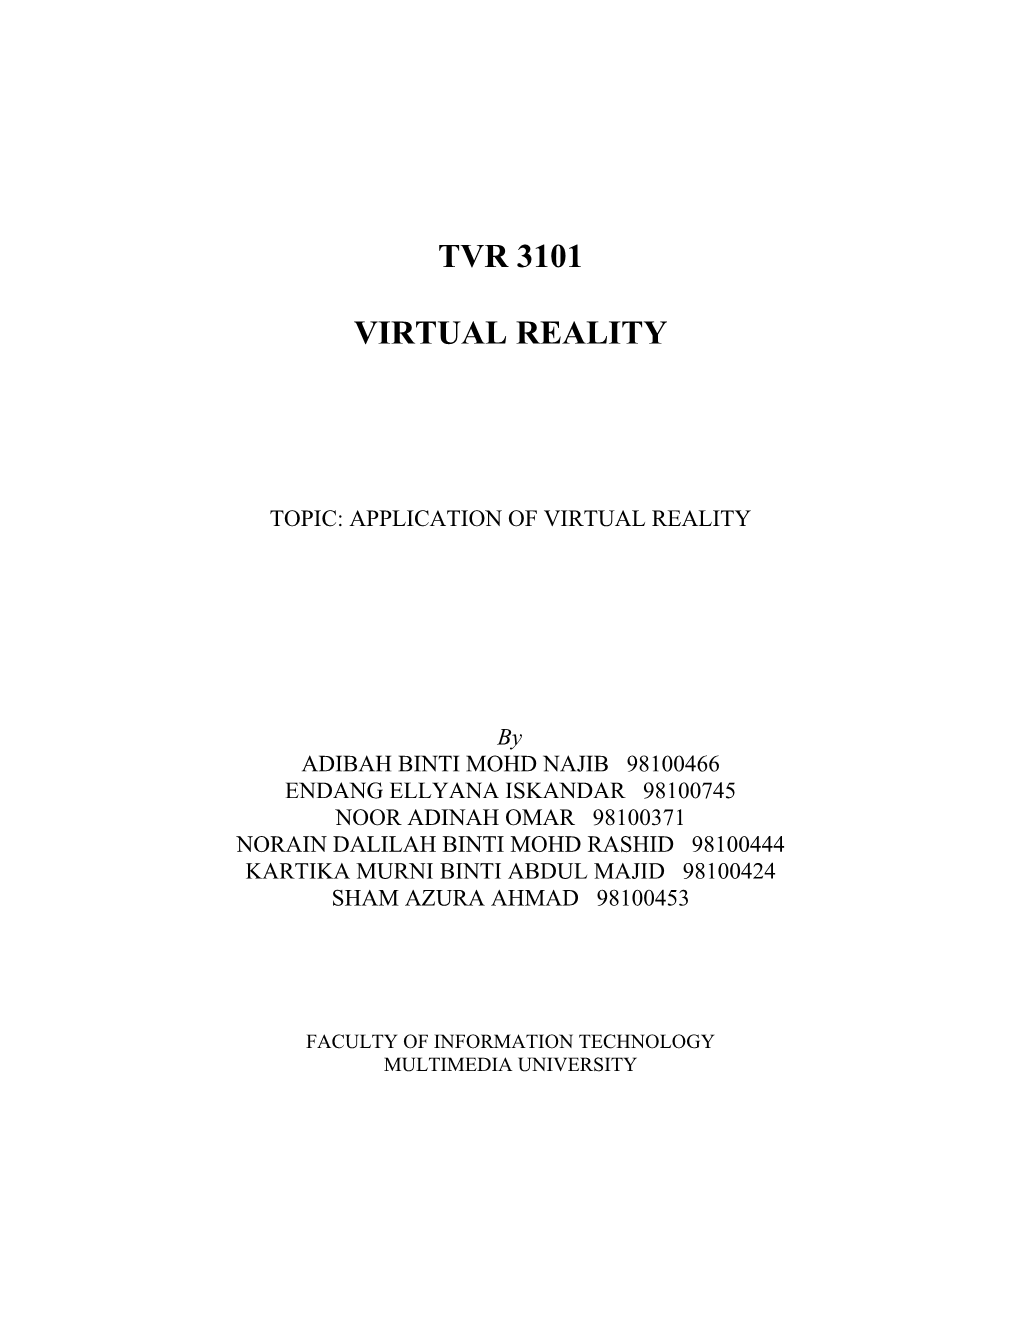 Topic: Application of Virtual Reality